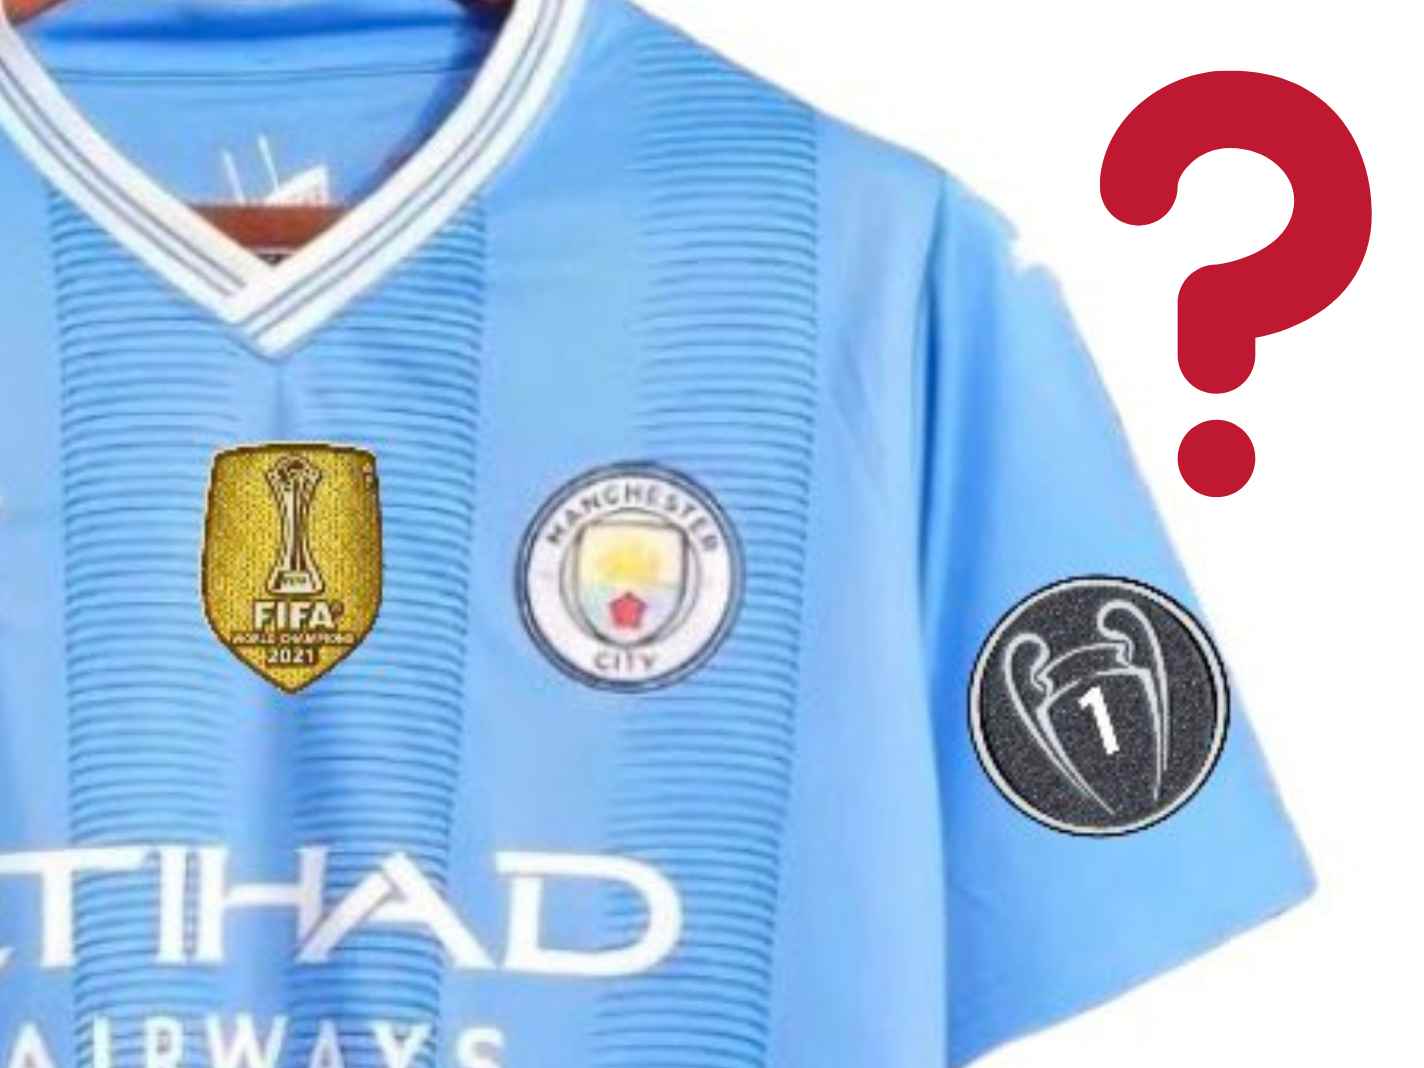 Man City Fans Dream of CL Badge of Honour on Kits Next Season, but Here’s the Reality